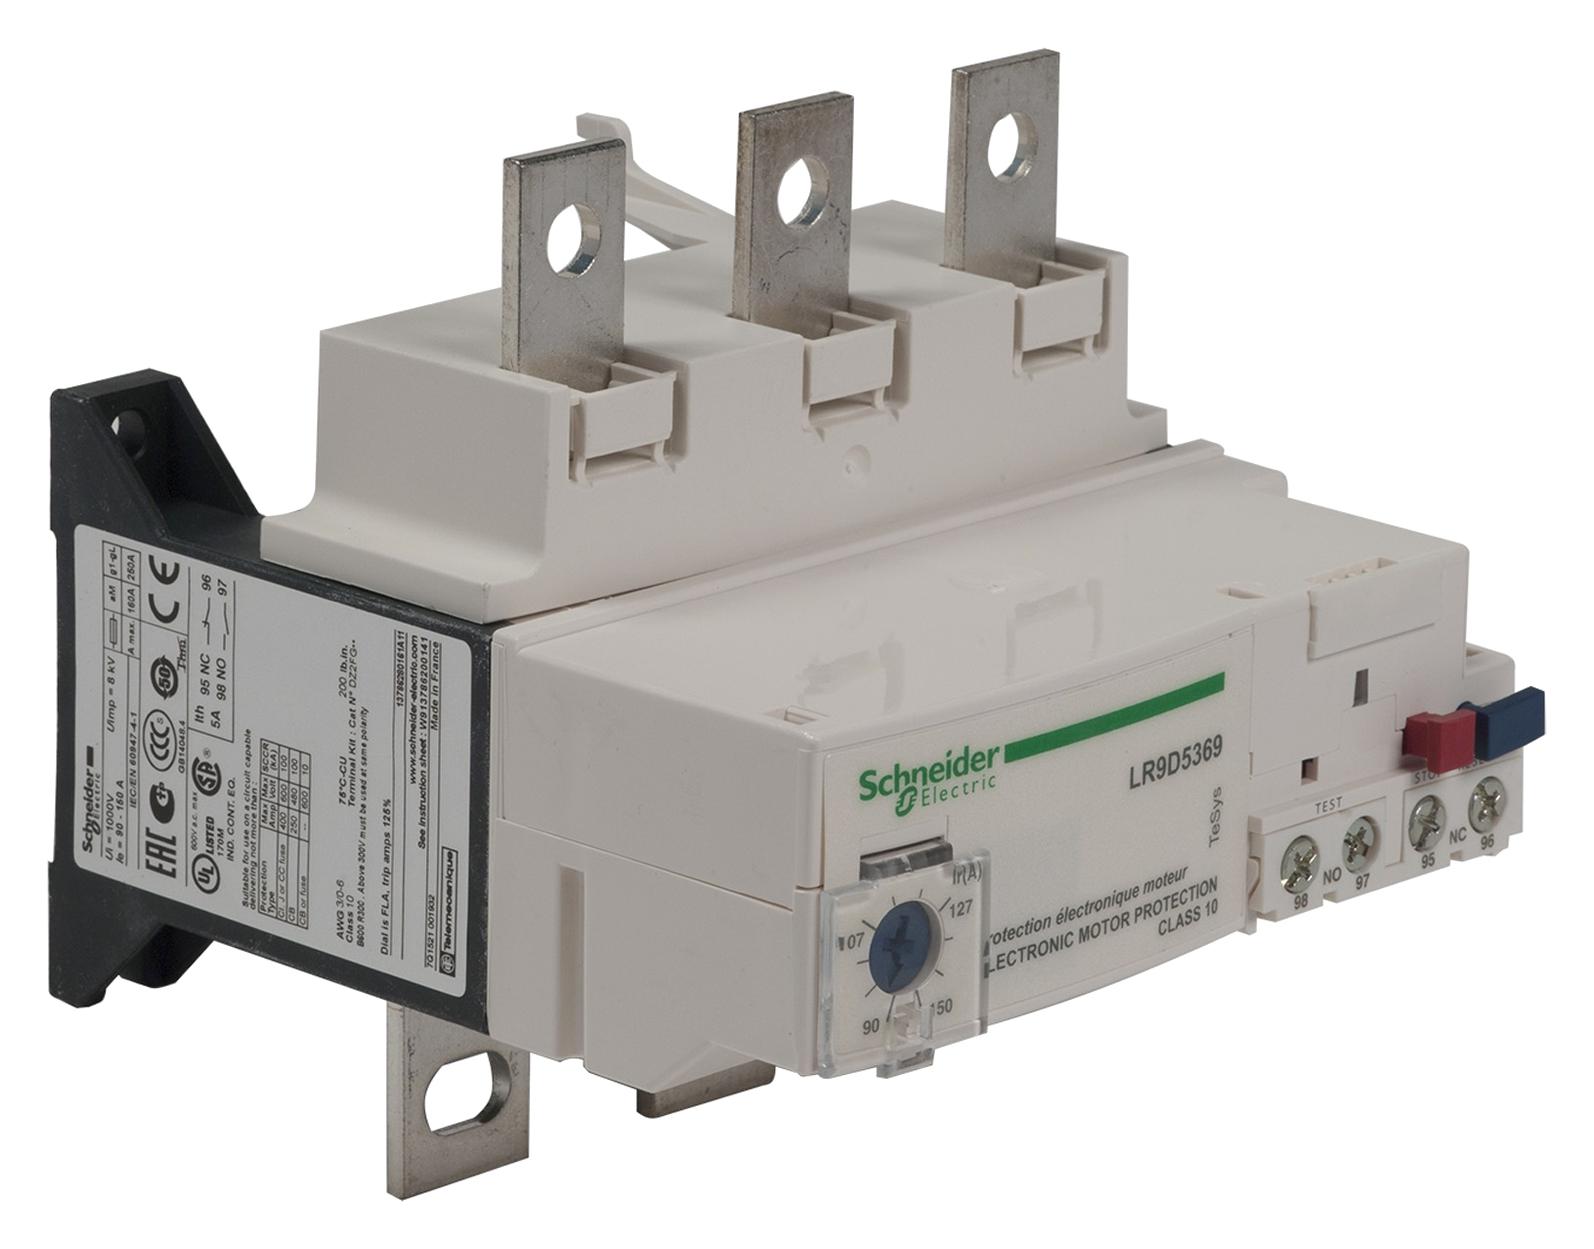 LR9D5369 THERMAL OVERLOAD, 90A-150A SCHNEIDER ELECTRIC